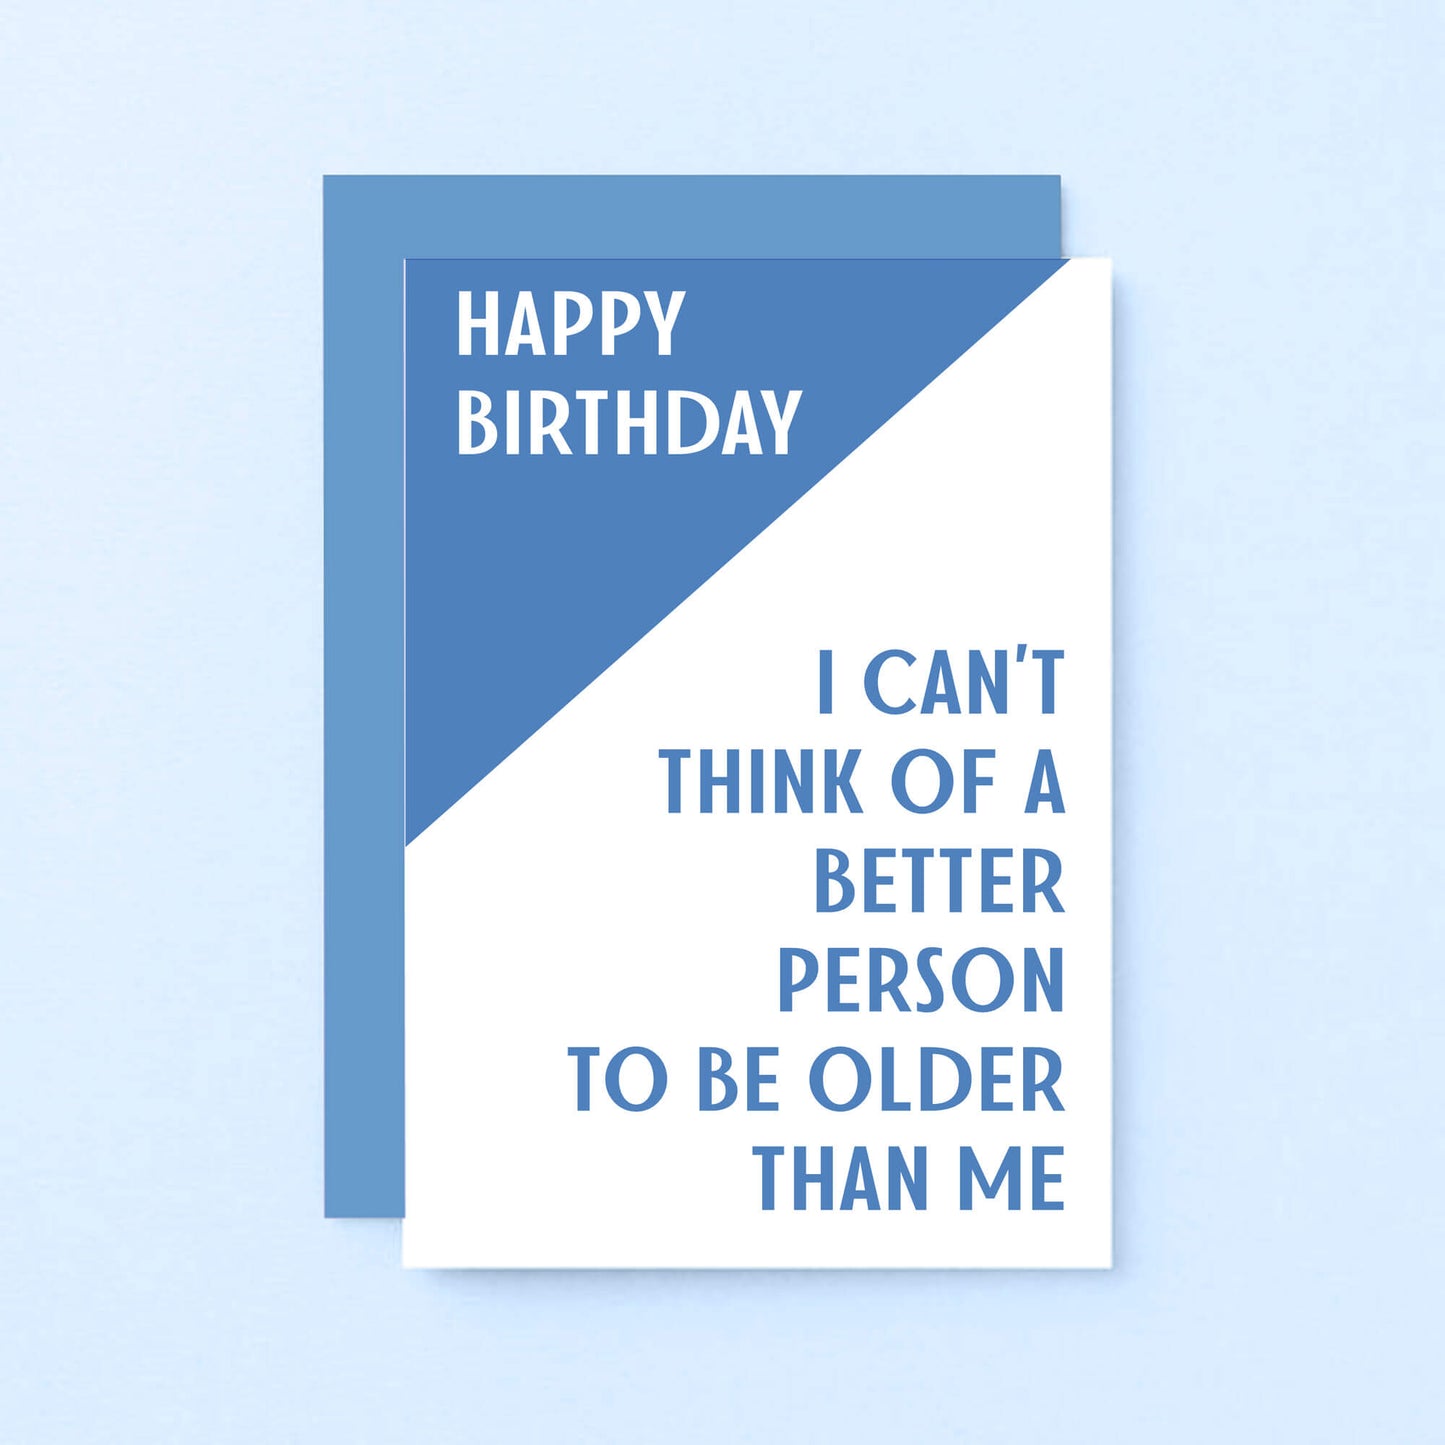 Birthday Card by SixElevenCreations. Reads Happy birthday. I can't think of a better person to be older than me. Product Code SE3001A6